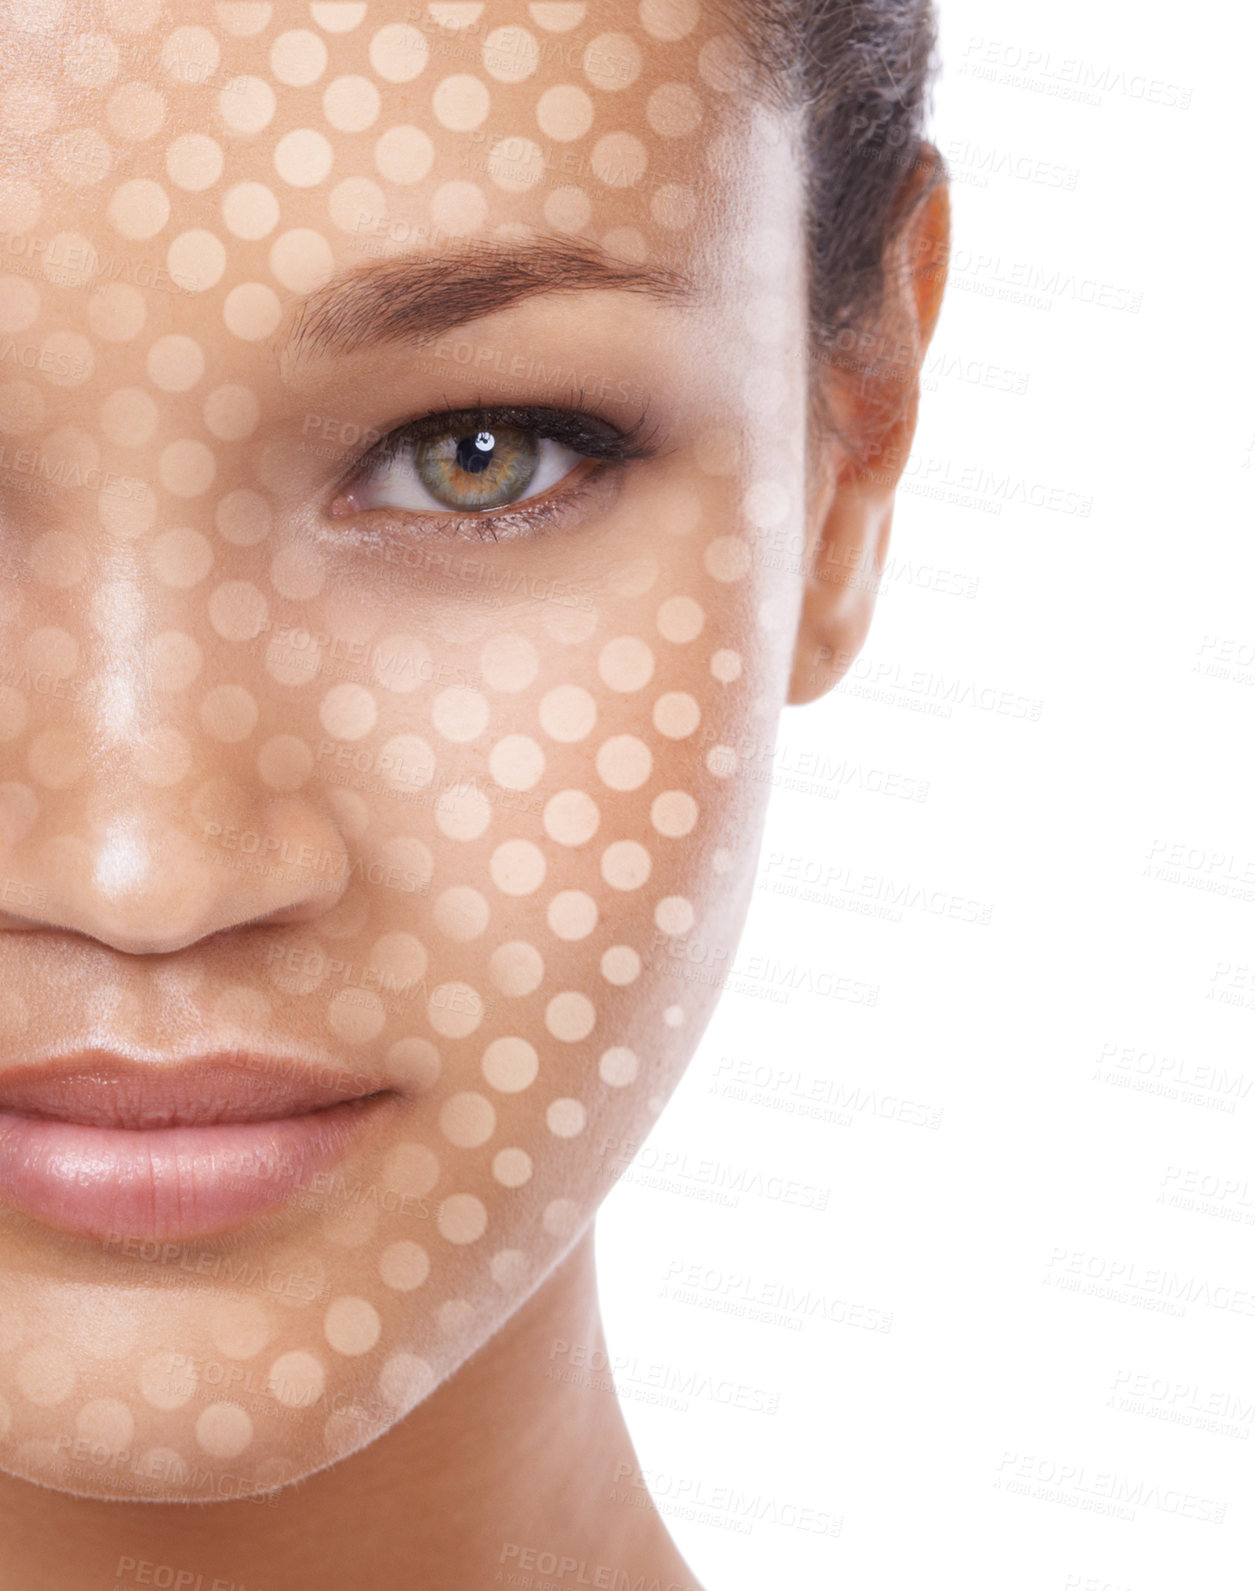 Buy stock photo Conceptual studio portrait of a young ethnic woman with a dot matrix overlay on her face